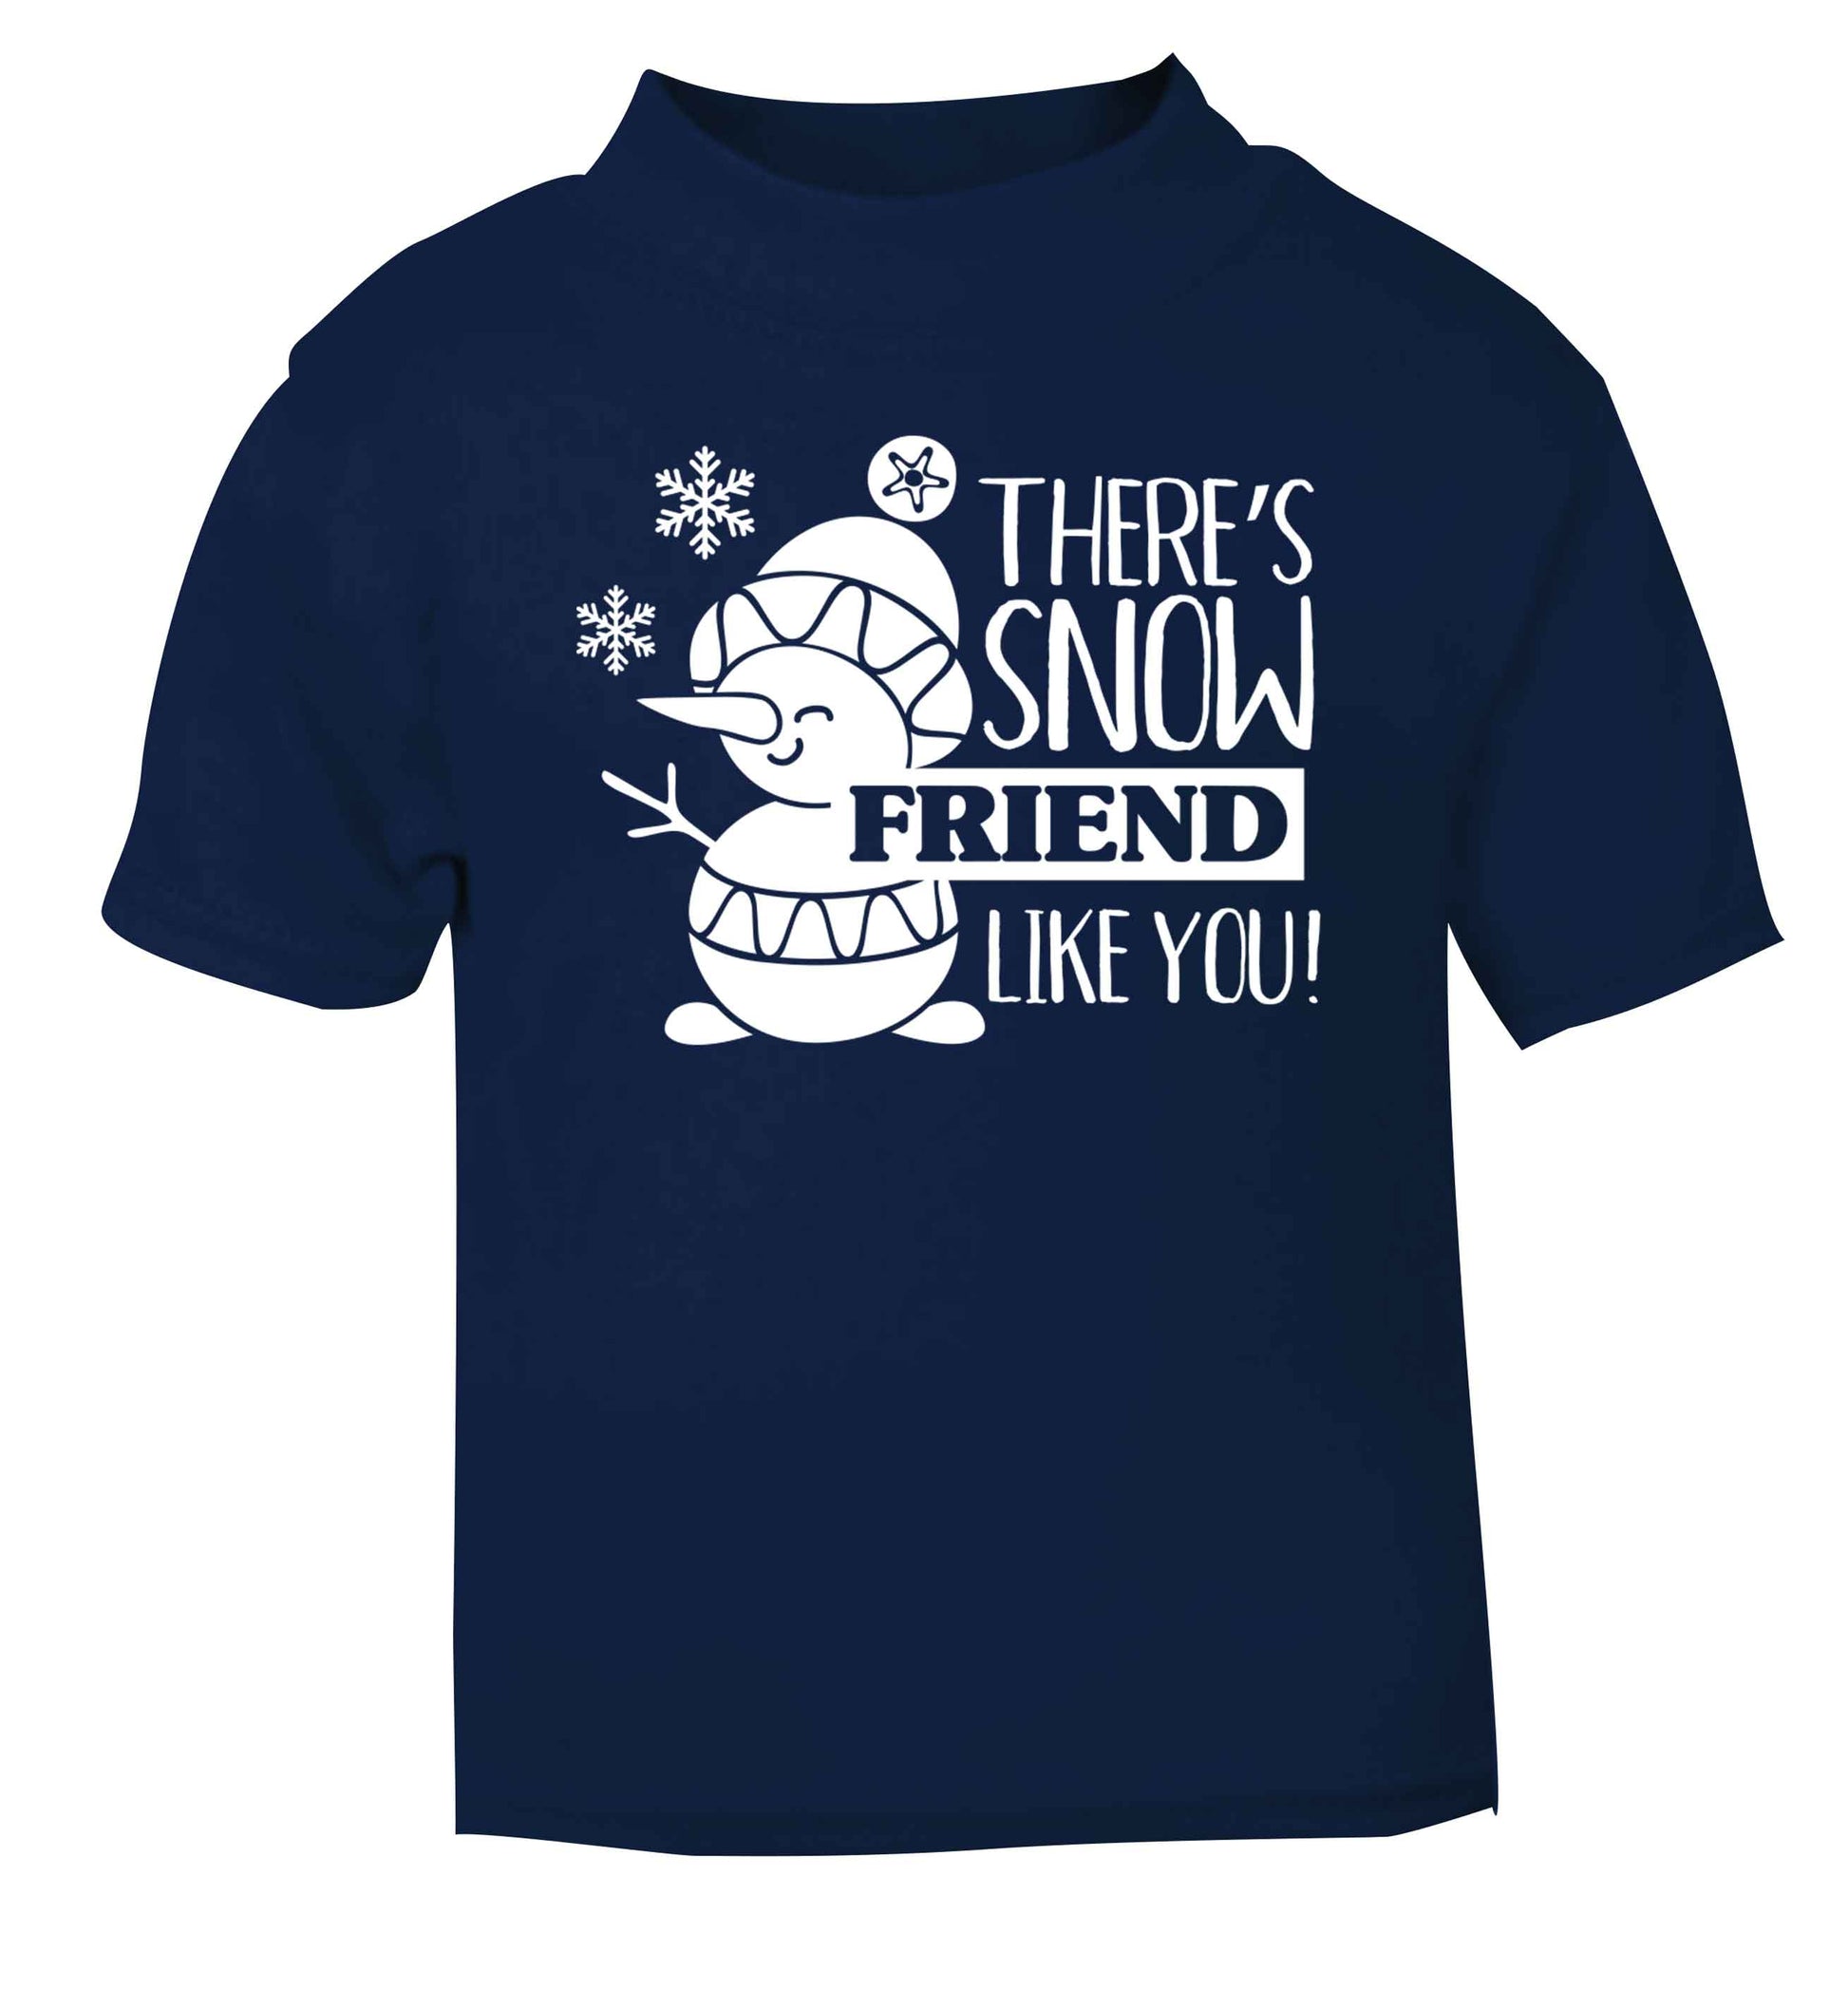 There's snow friend like you navy baby toddler Tshirt 2 Years